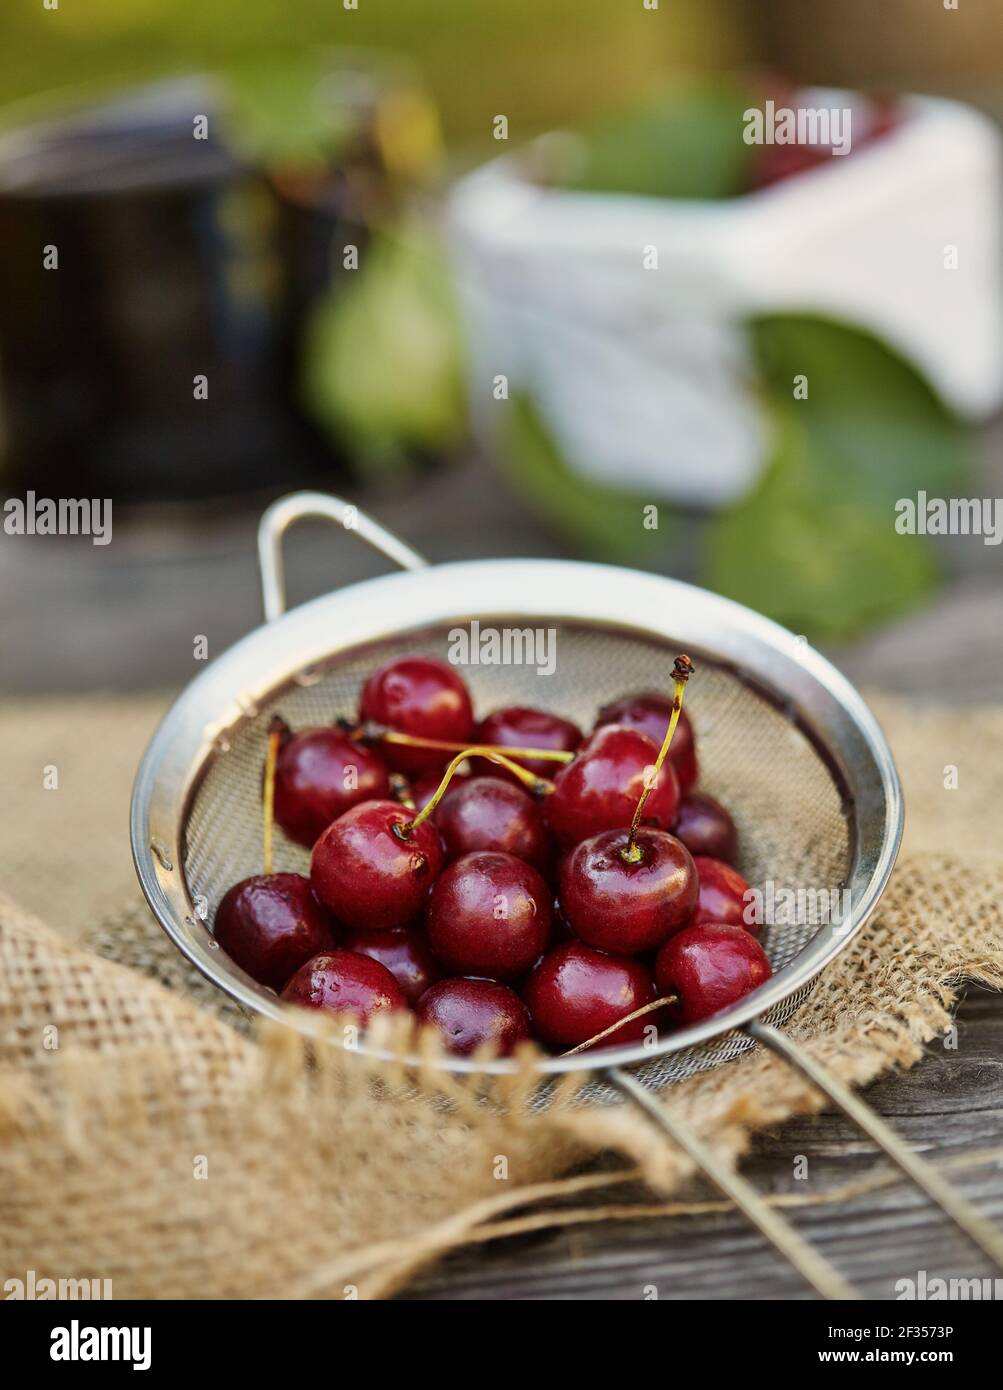 Fresh washed cherries on a sieve. Composition on the table Stock Photo